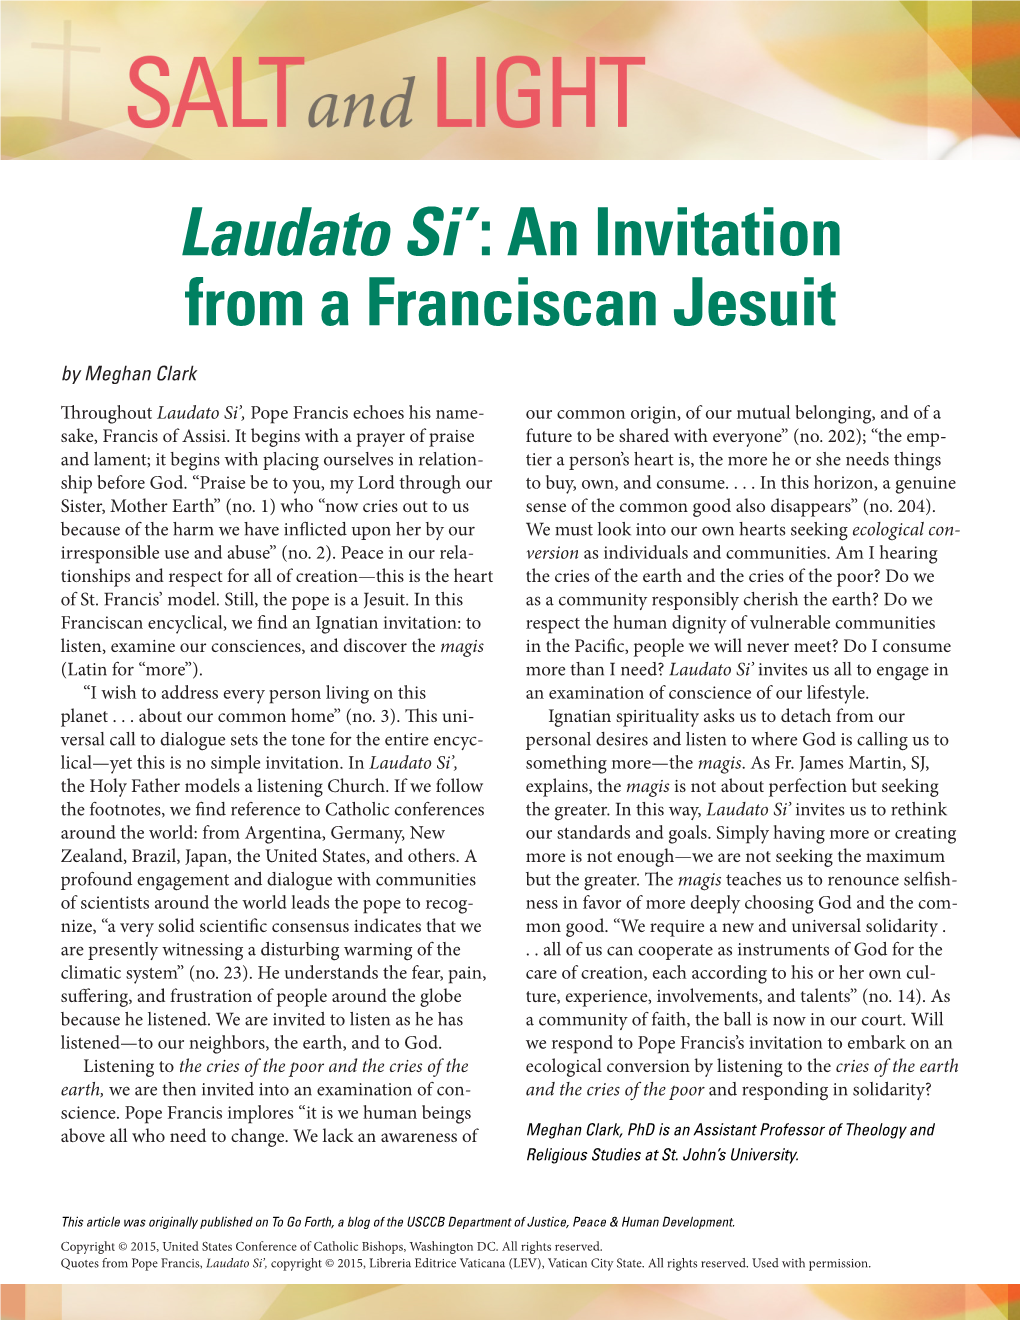 Laudato Si': an Invitation from a Franciscan Jesuit